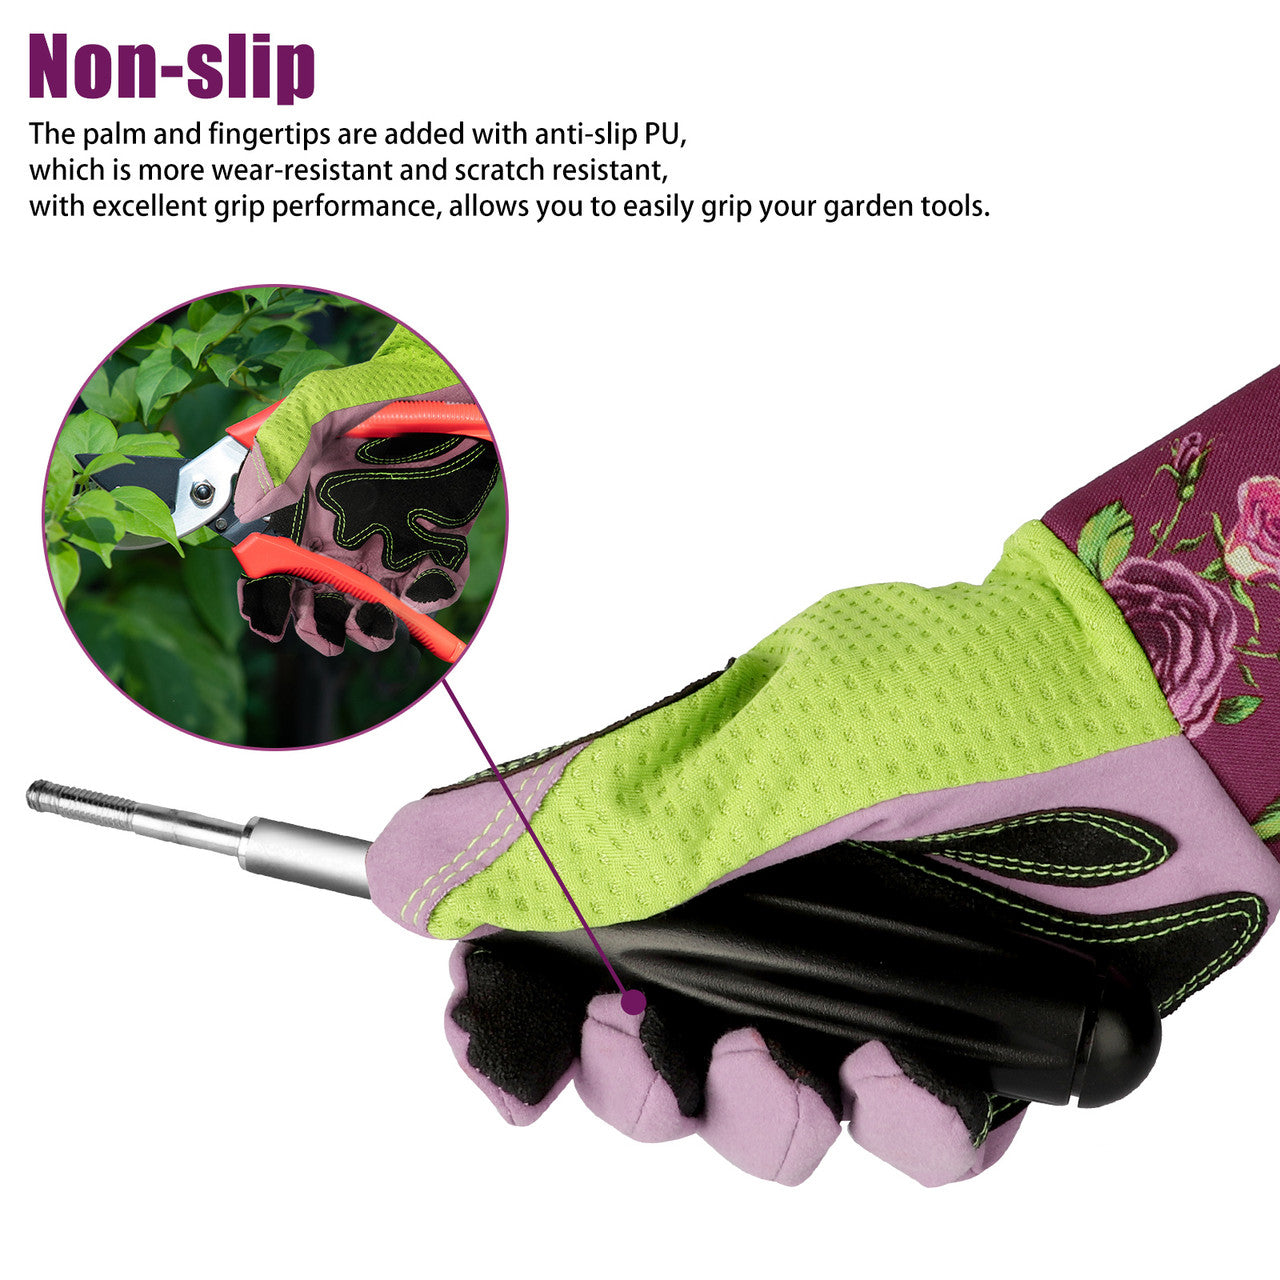 Garden Gauntlet Long Gloves, Thorn Proof, Perfect for Outdoors and Gardening